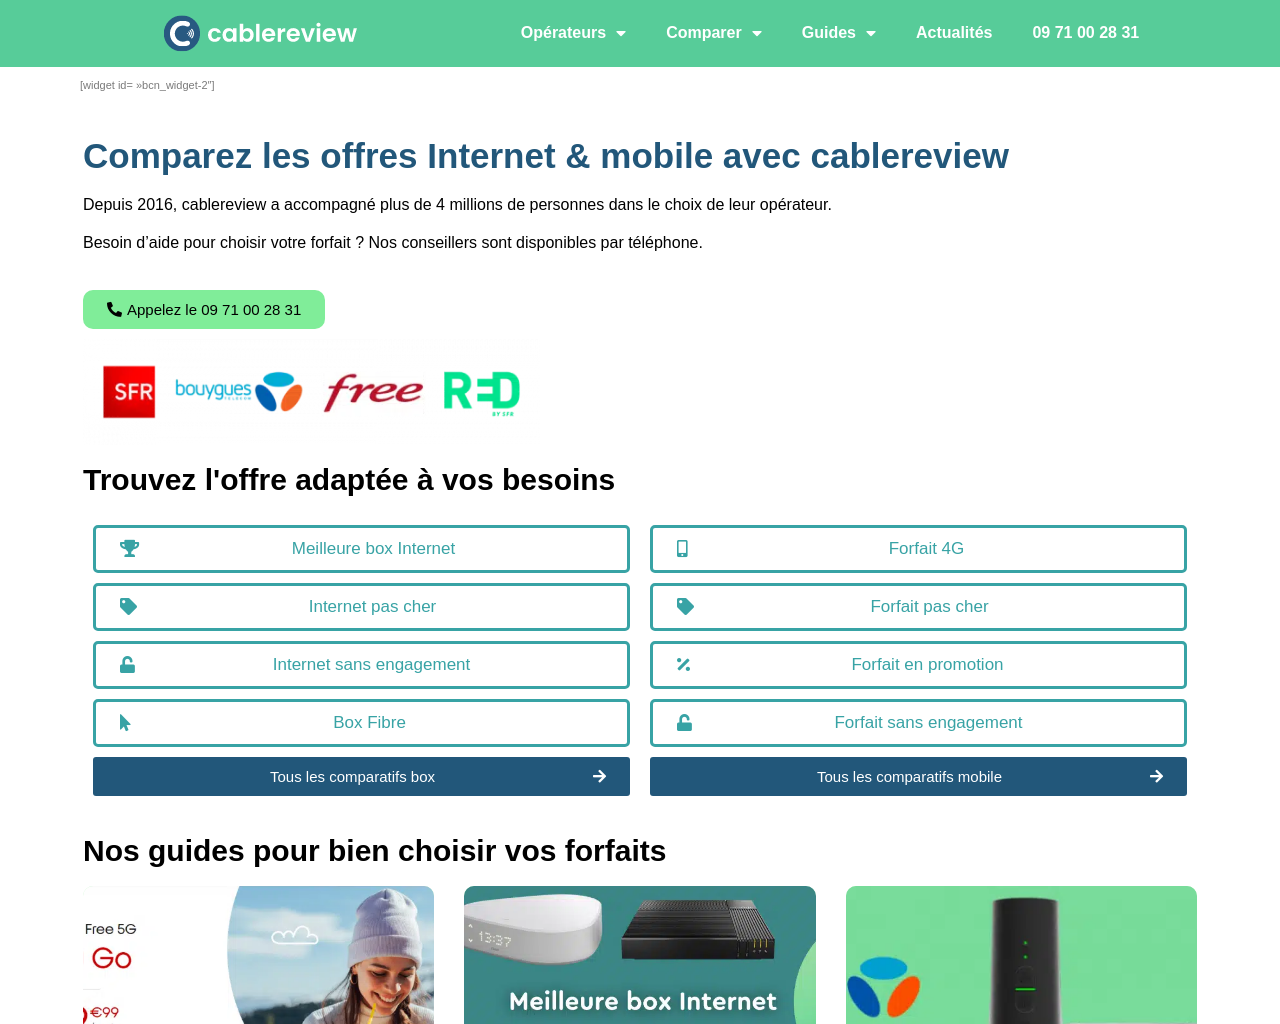 www.cablereview.fr